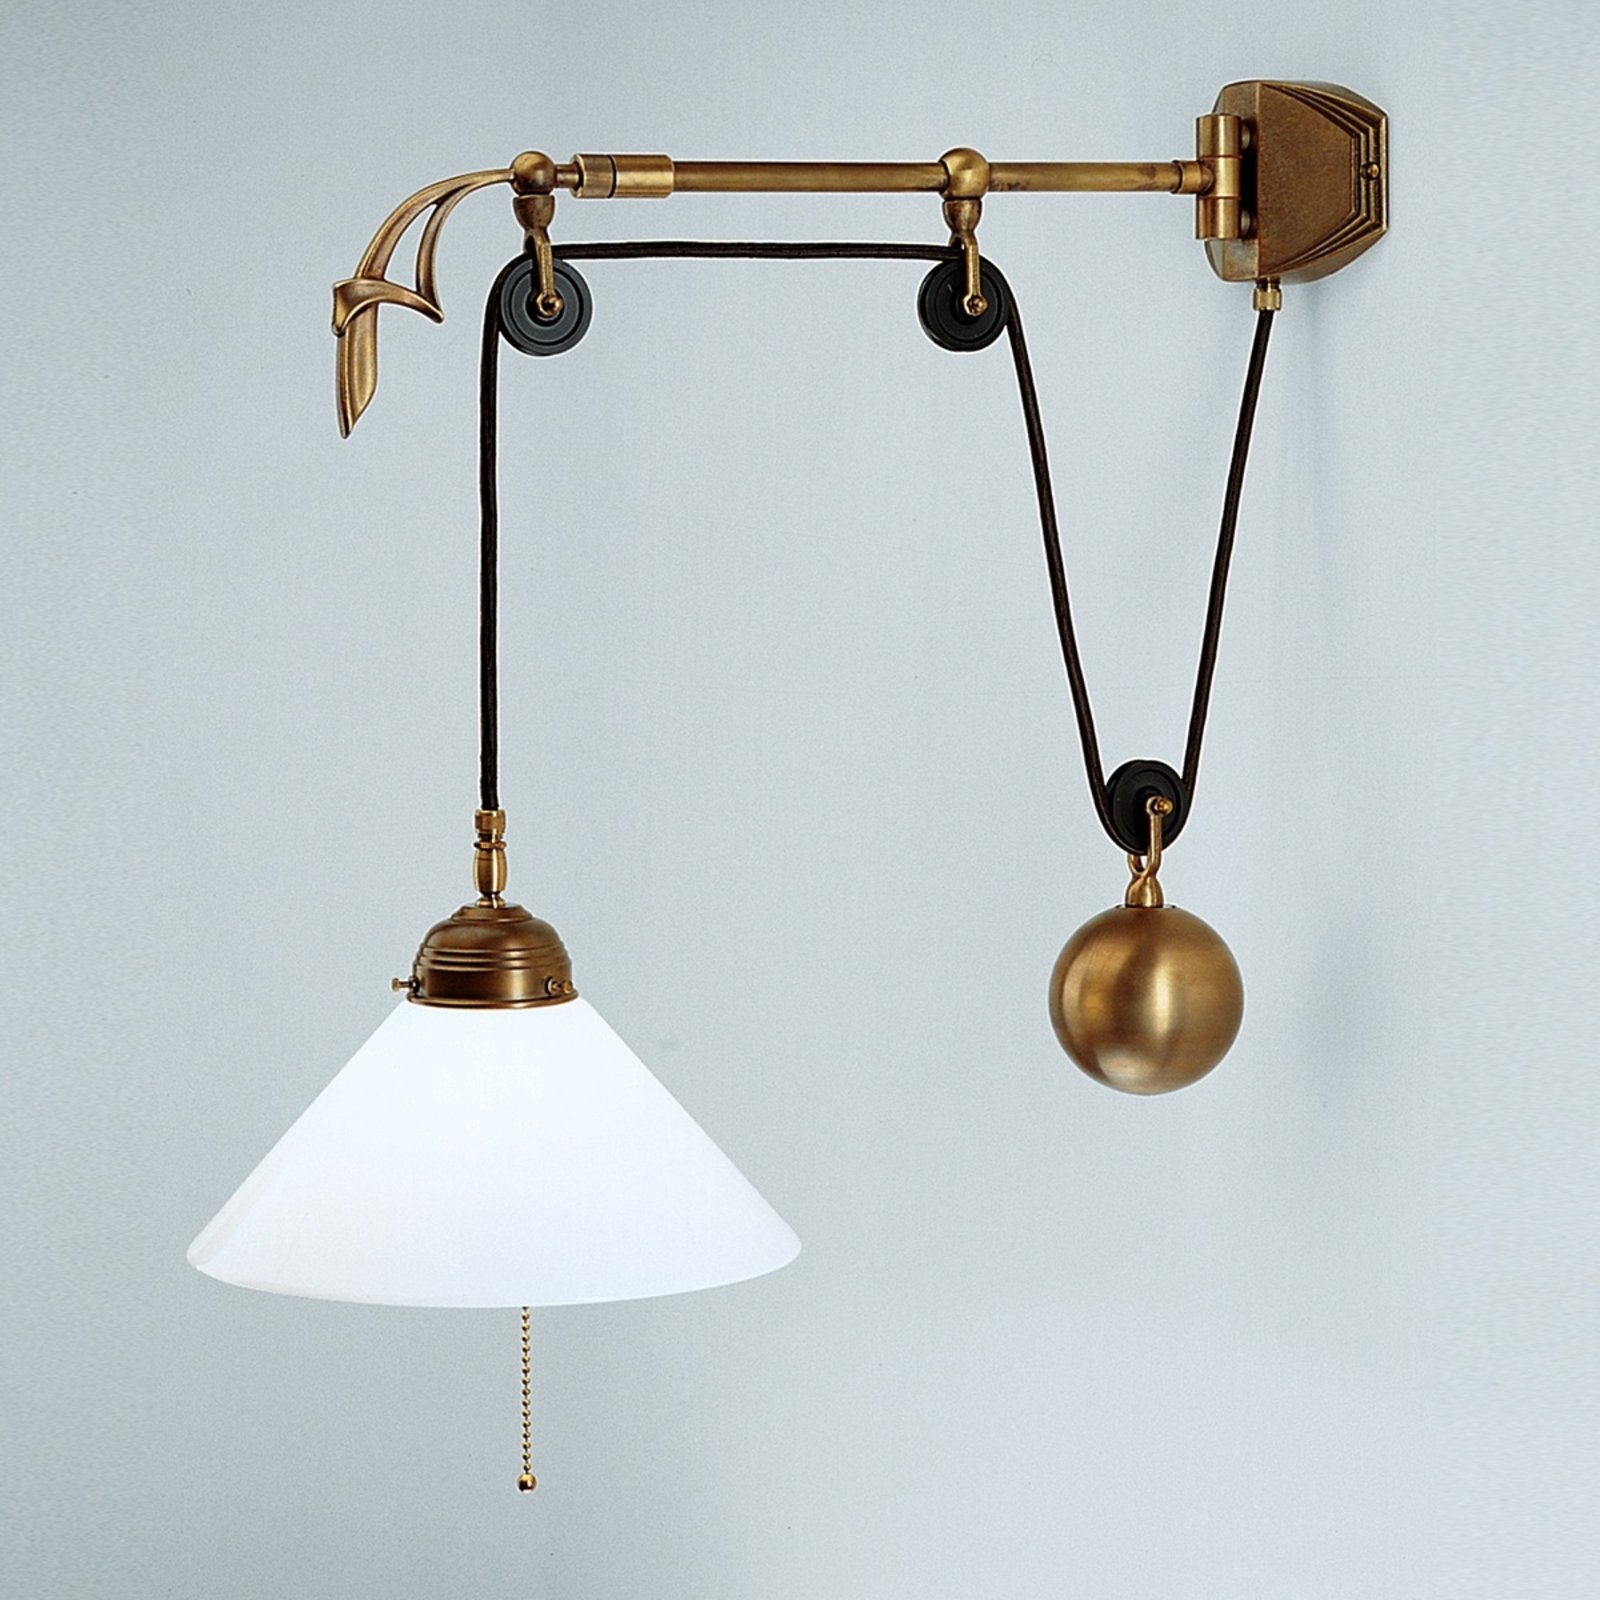 Gregory wall light made of brass